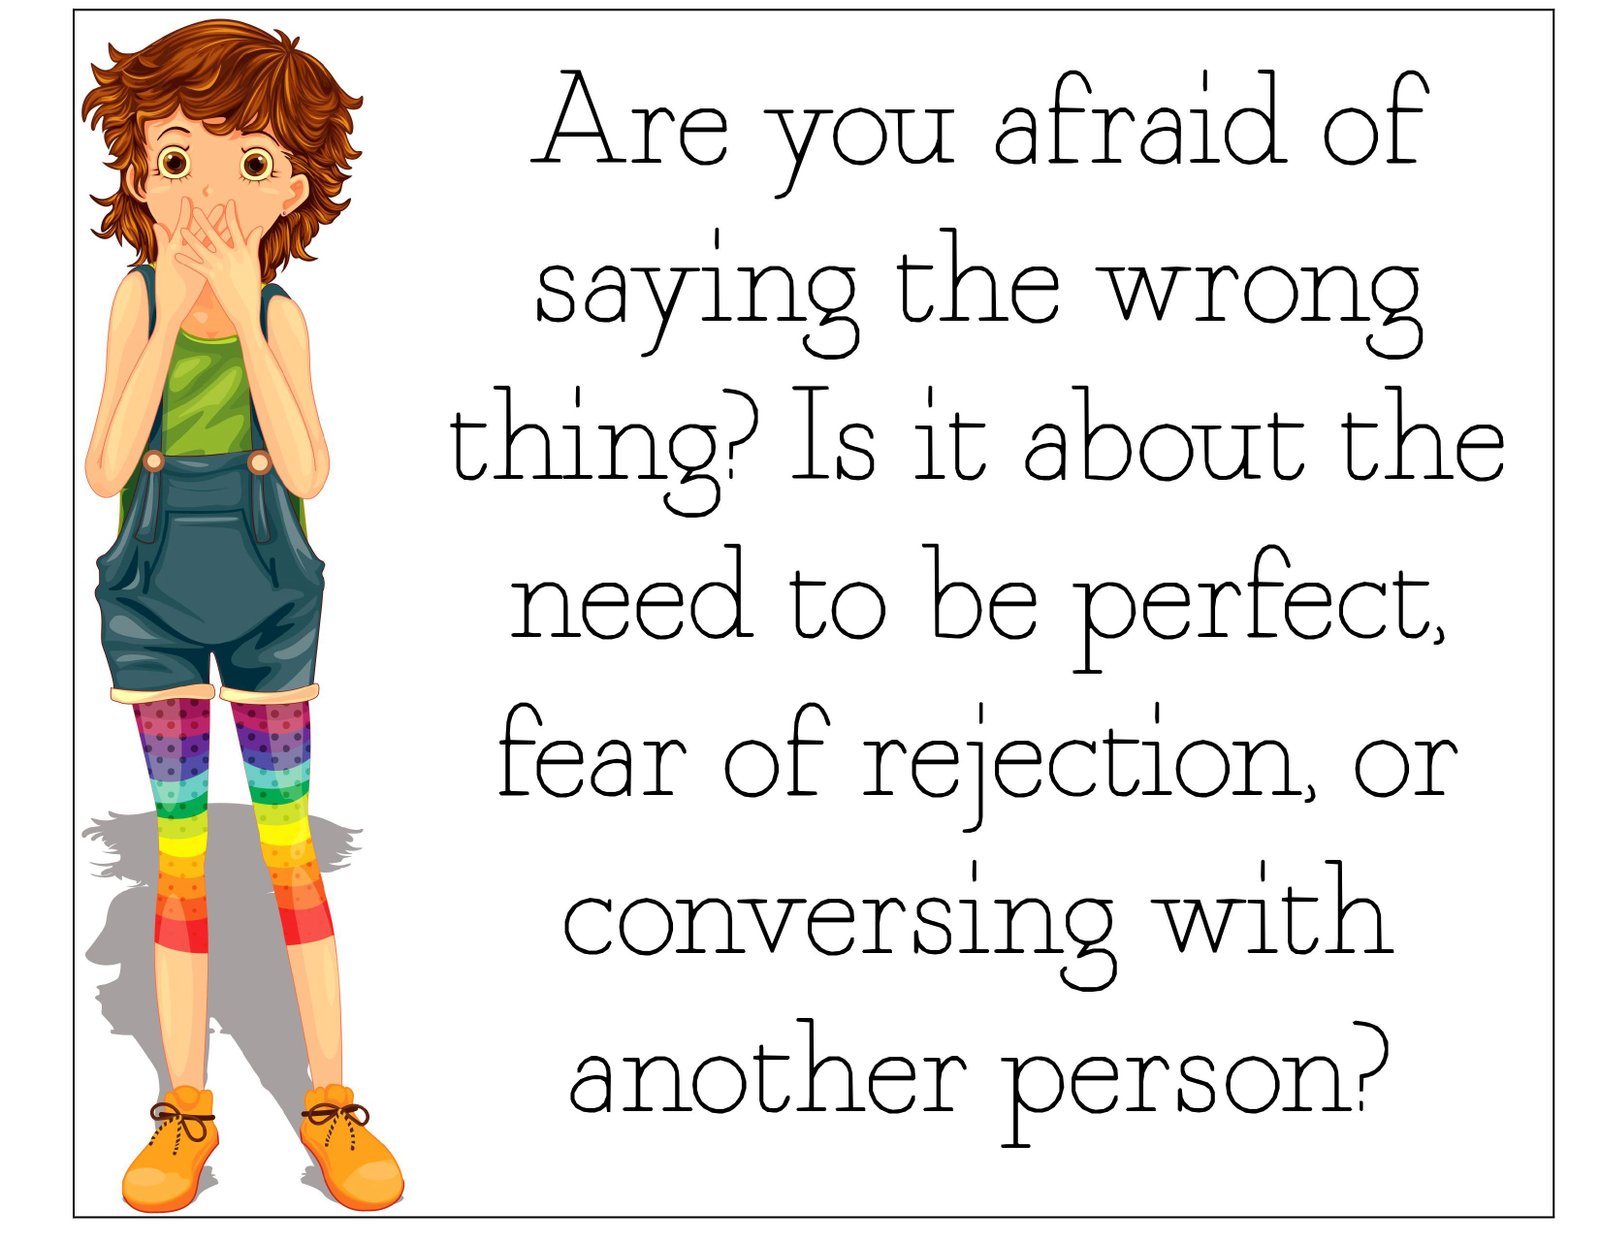 Are you afraid of saying the wrong thing